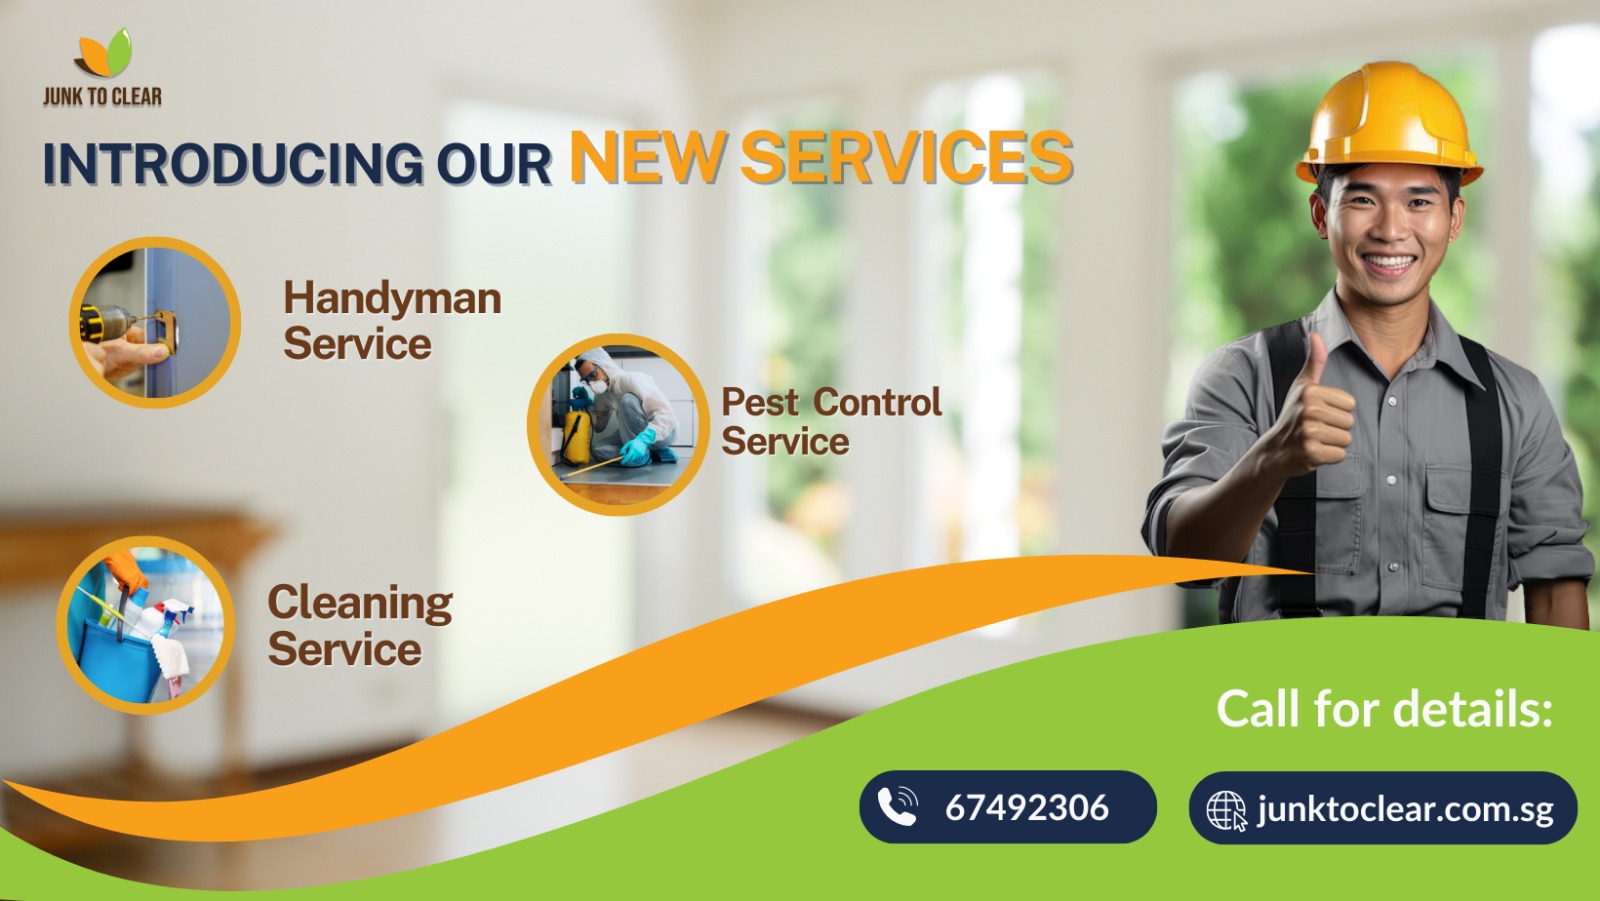 Introducing our new services